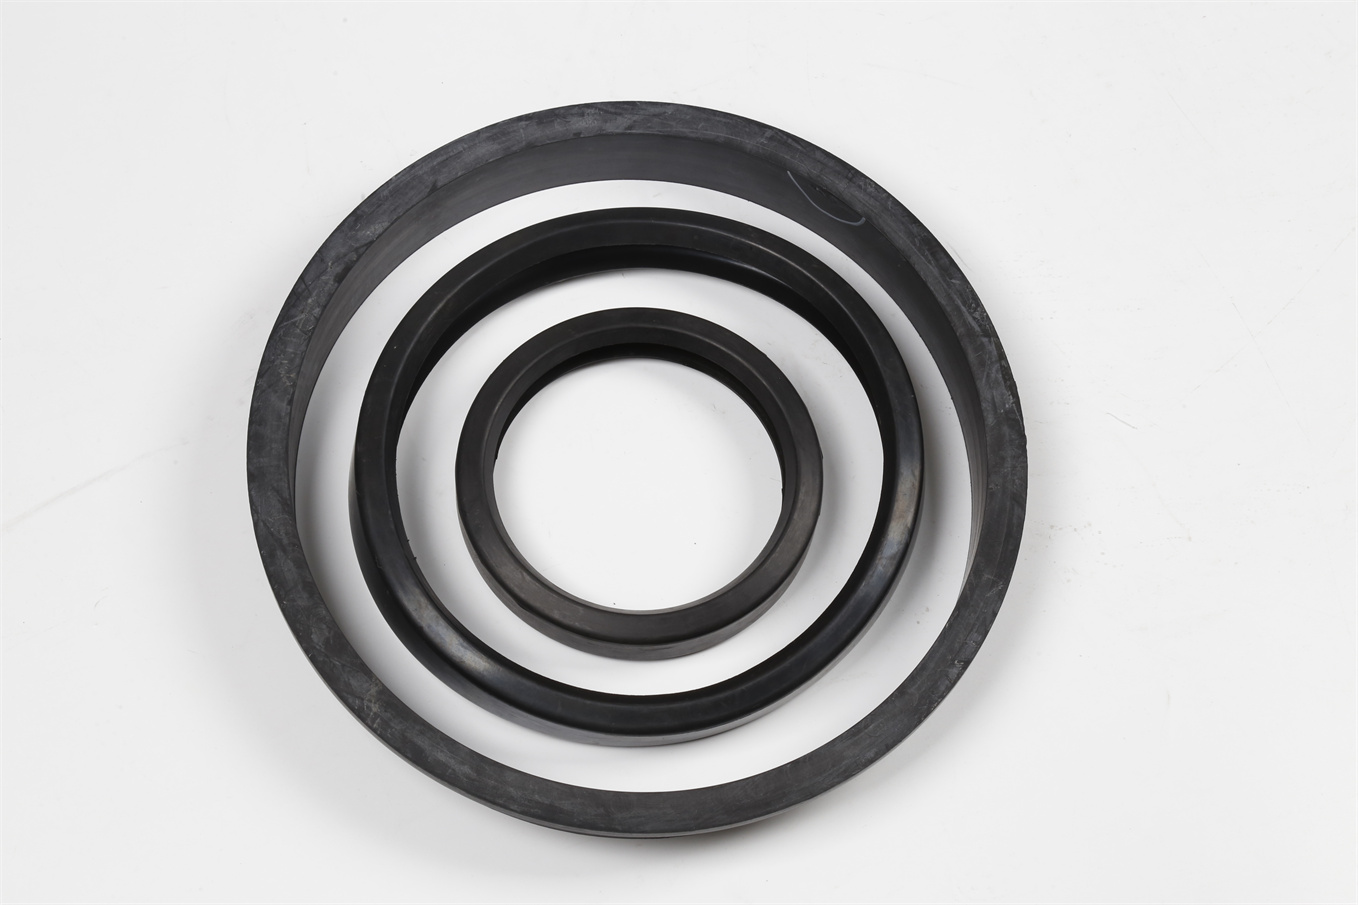 How long can silicone seal ring be used?